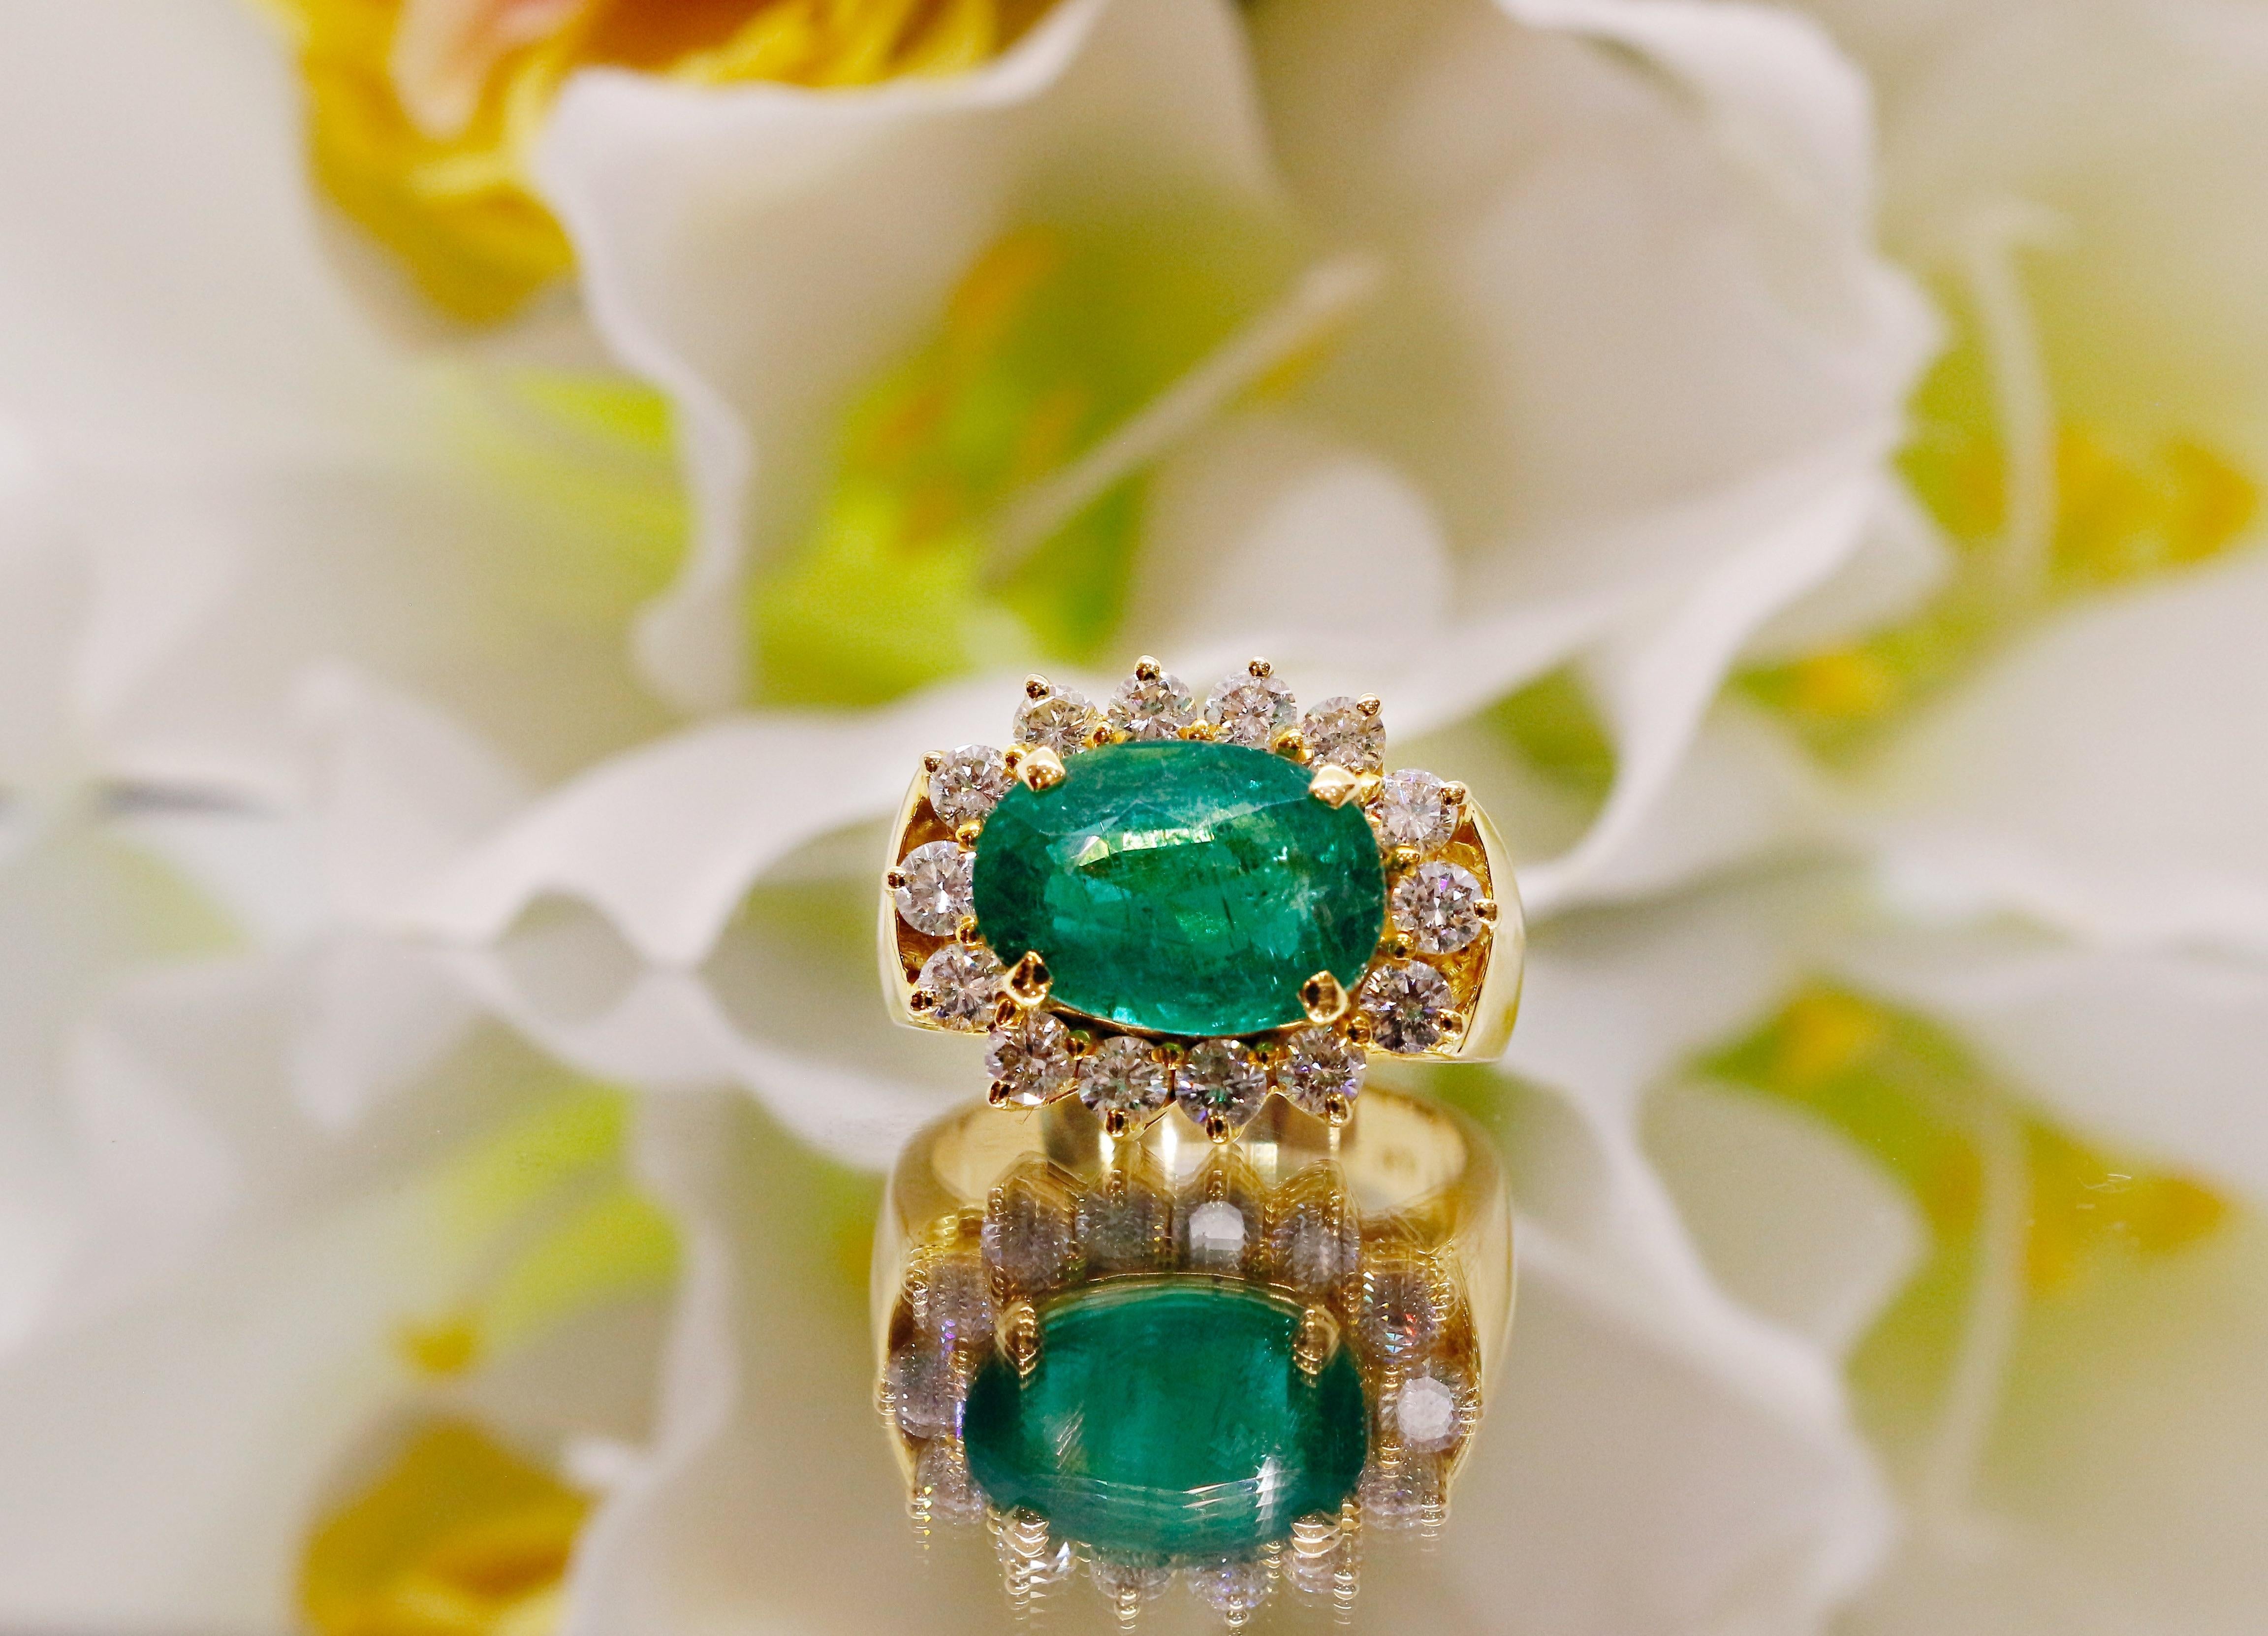 An exquisite 18k gold Zambian emerald ring.
For when only the best will do.

Handmade in Japan, this delightful emerald ring makes an unforgettable engagement token.
But, as our clients tell us, there are SO many wonderful opportunities to give